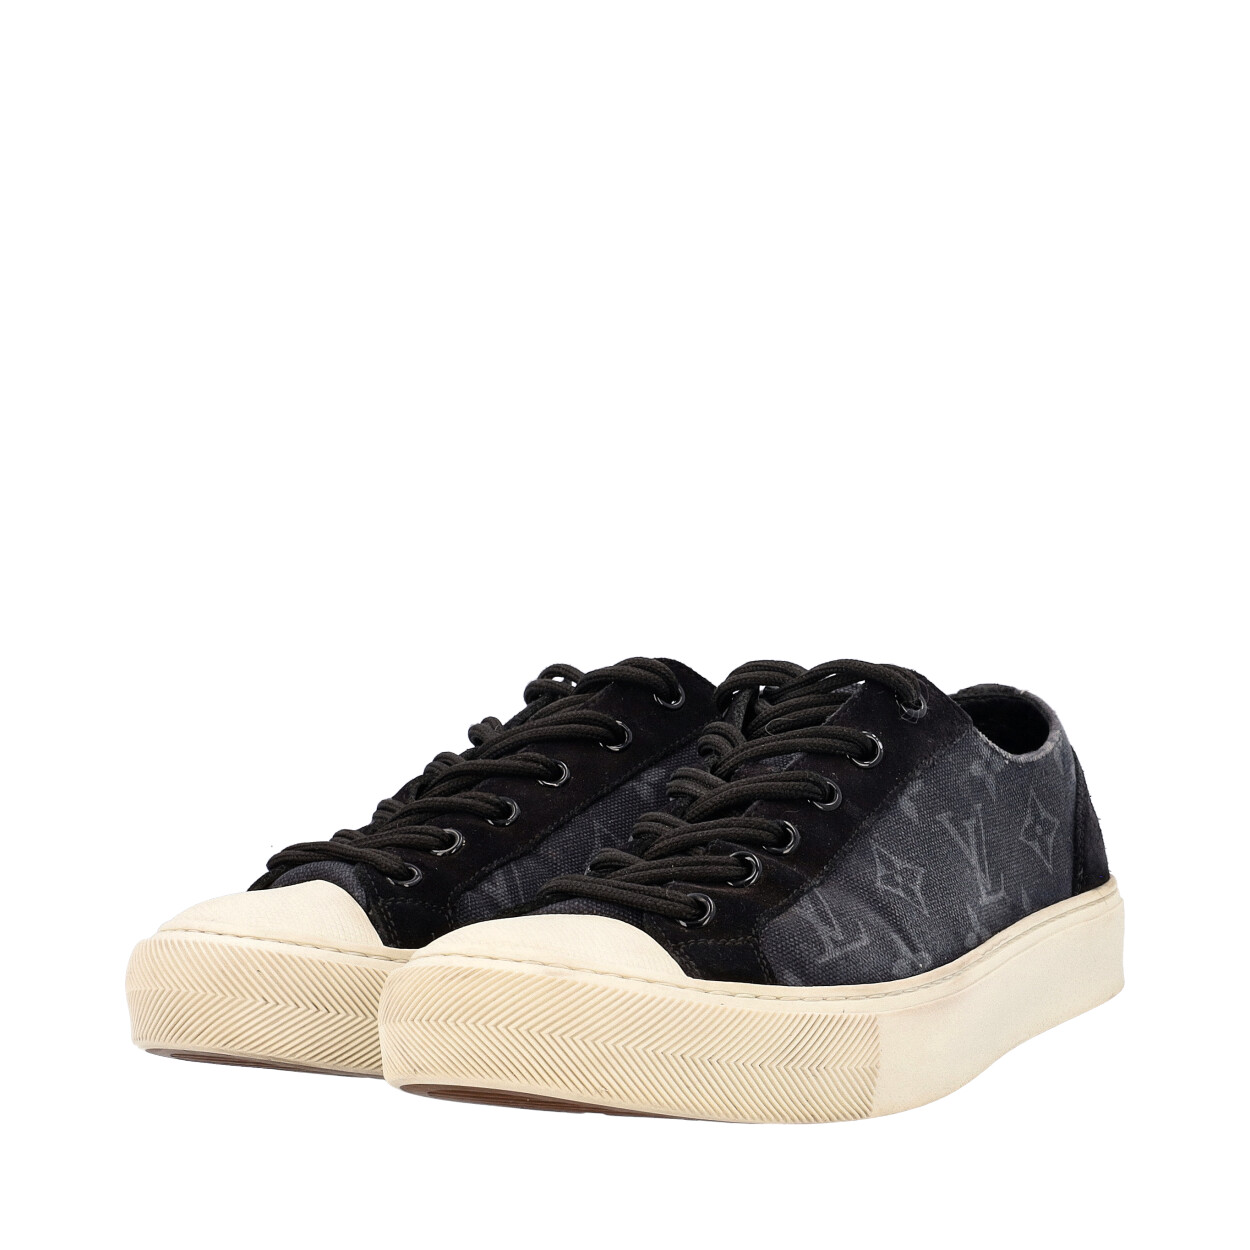 Sell Louis Vuitton x Fragment Tattoo Sneakers - Black